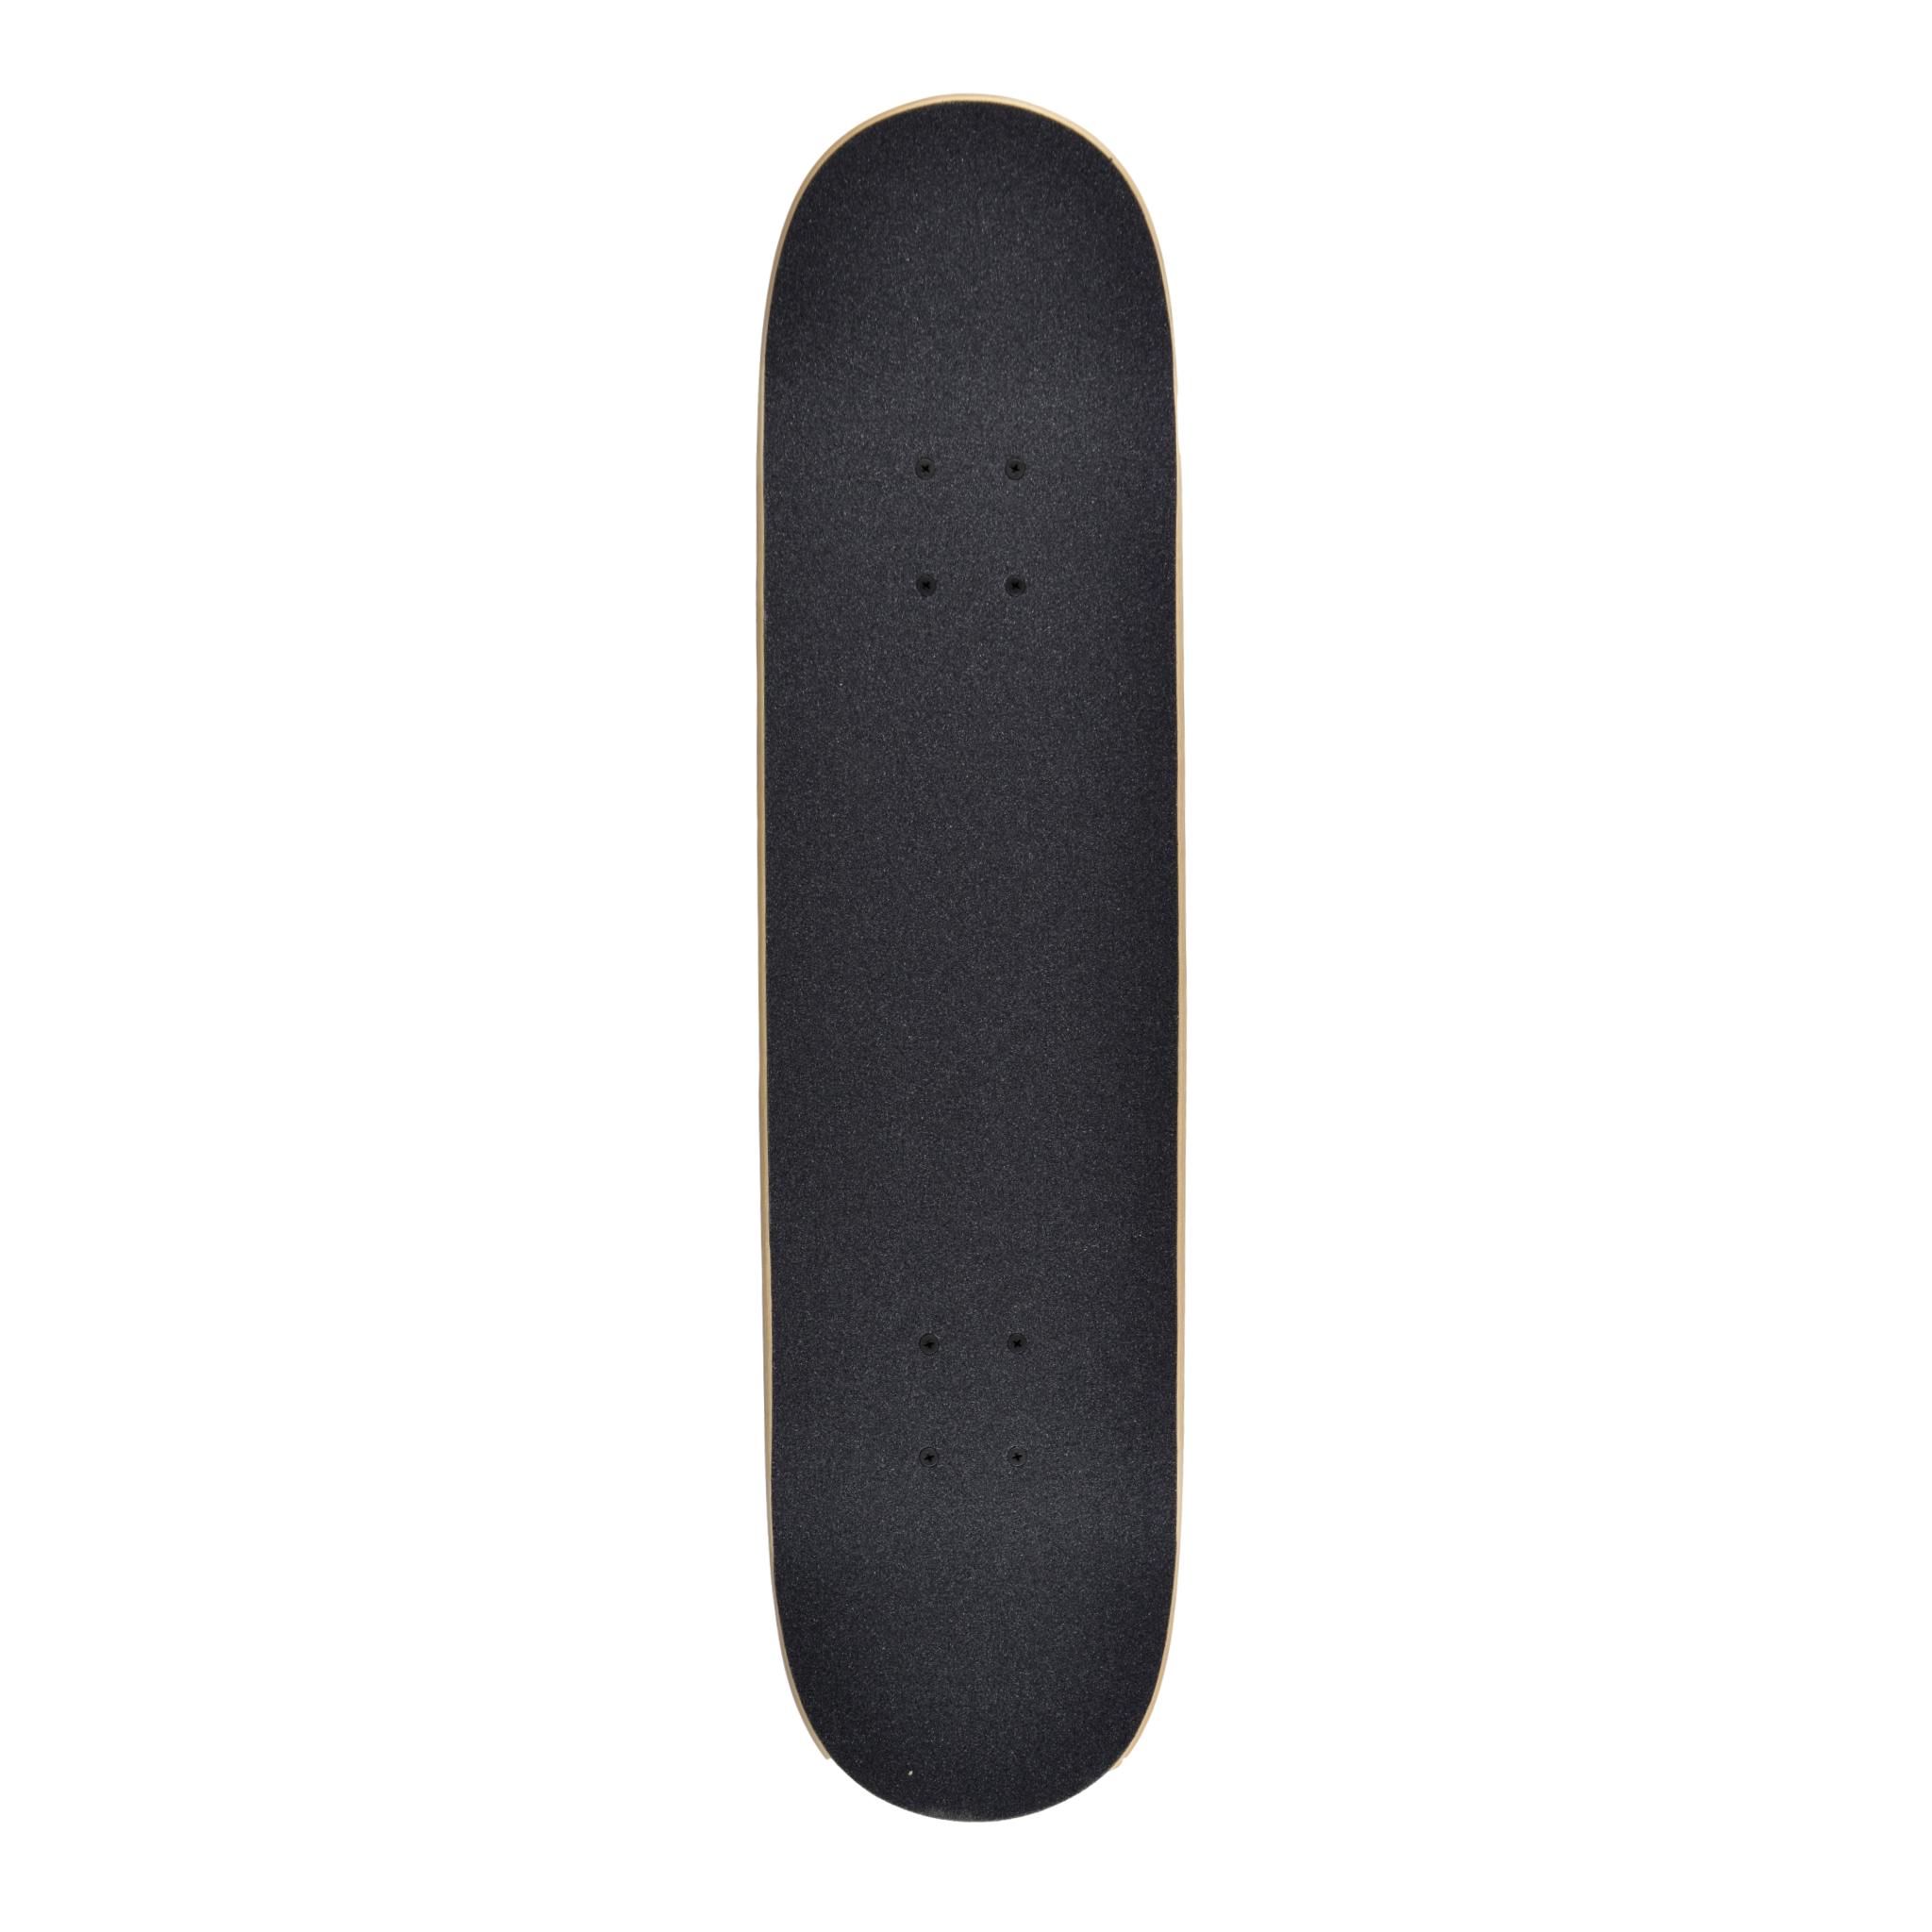 Powell Peralta Vallely Birch Completo 8.0